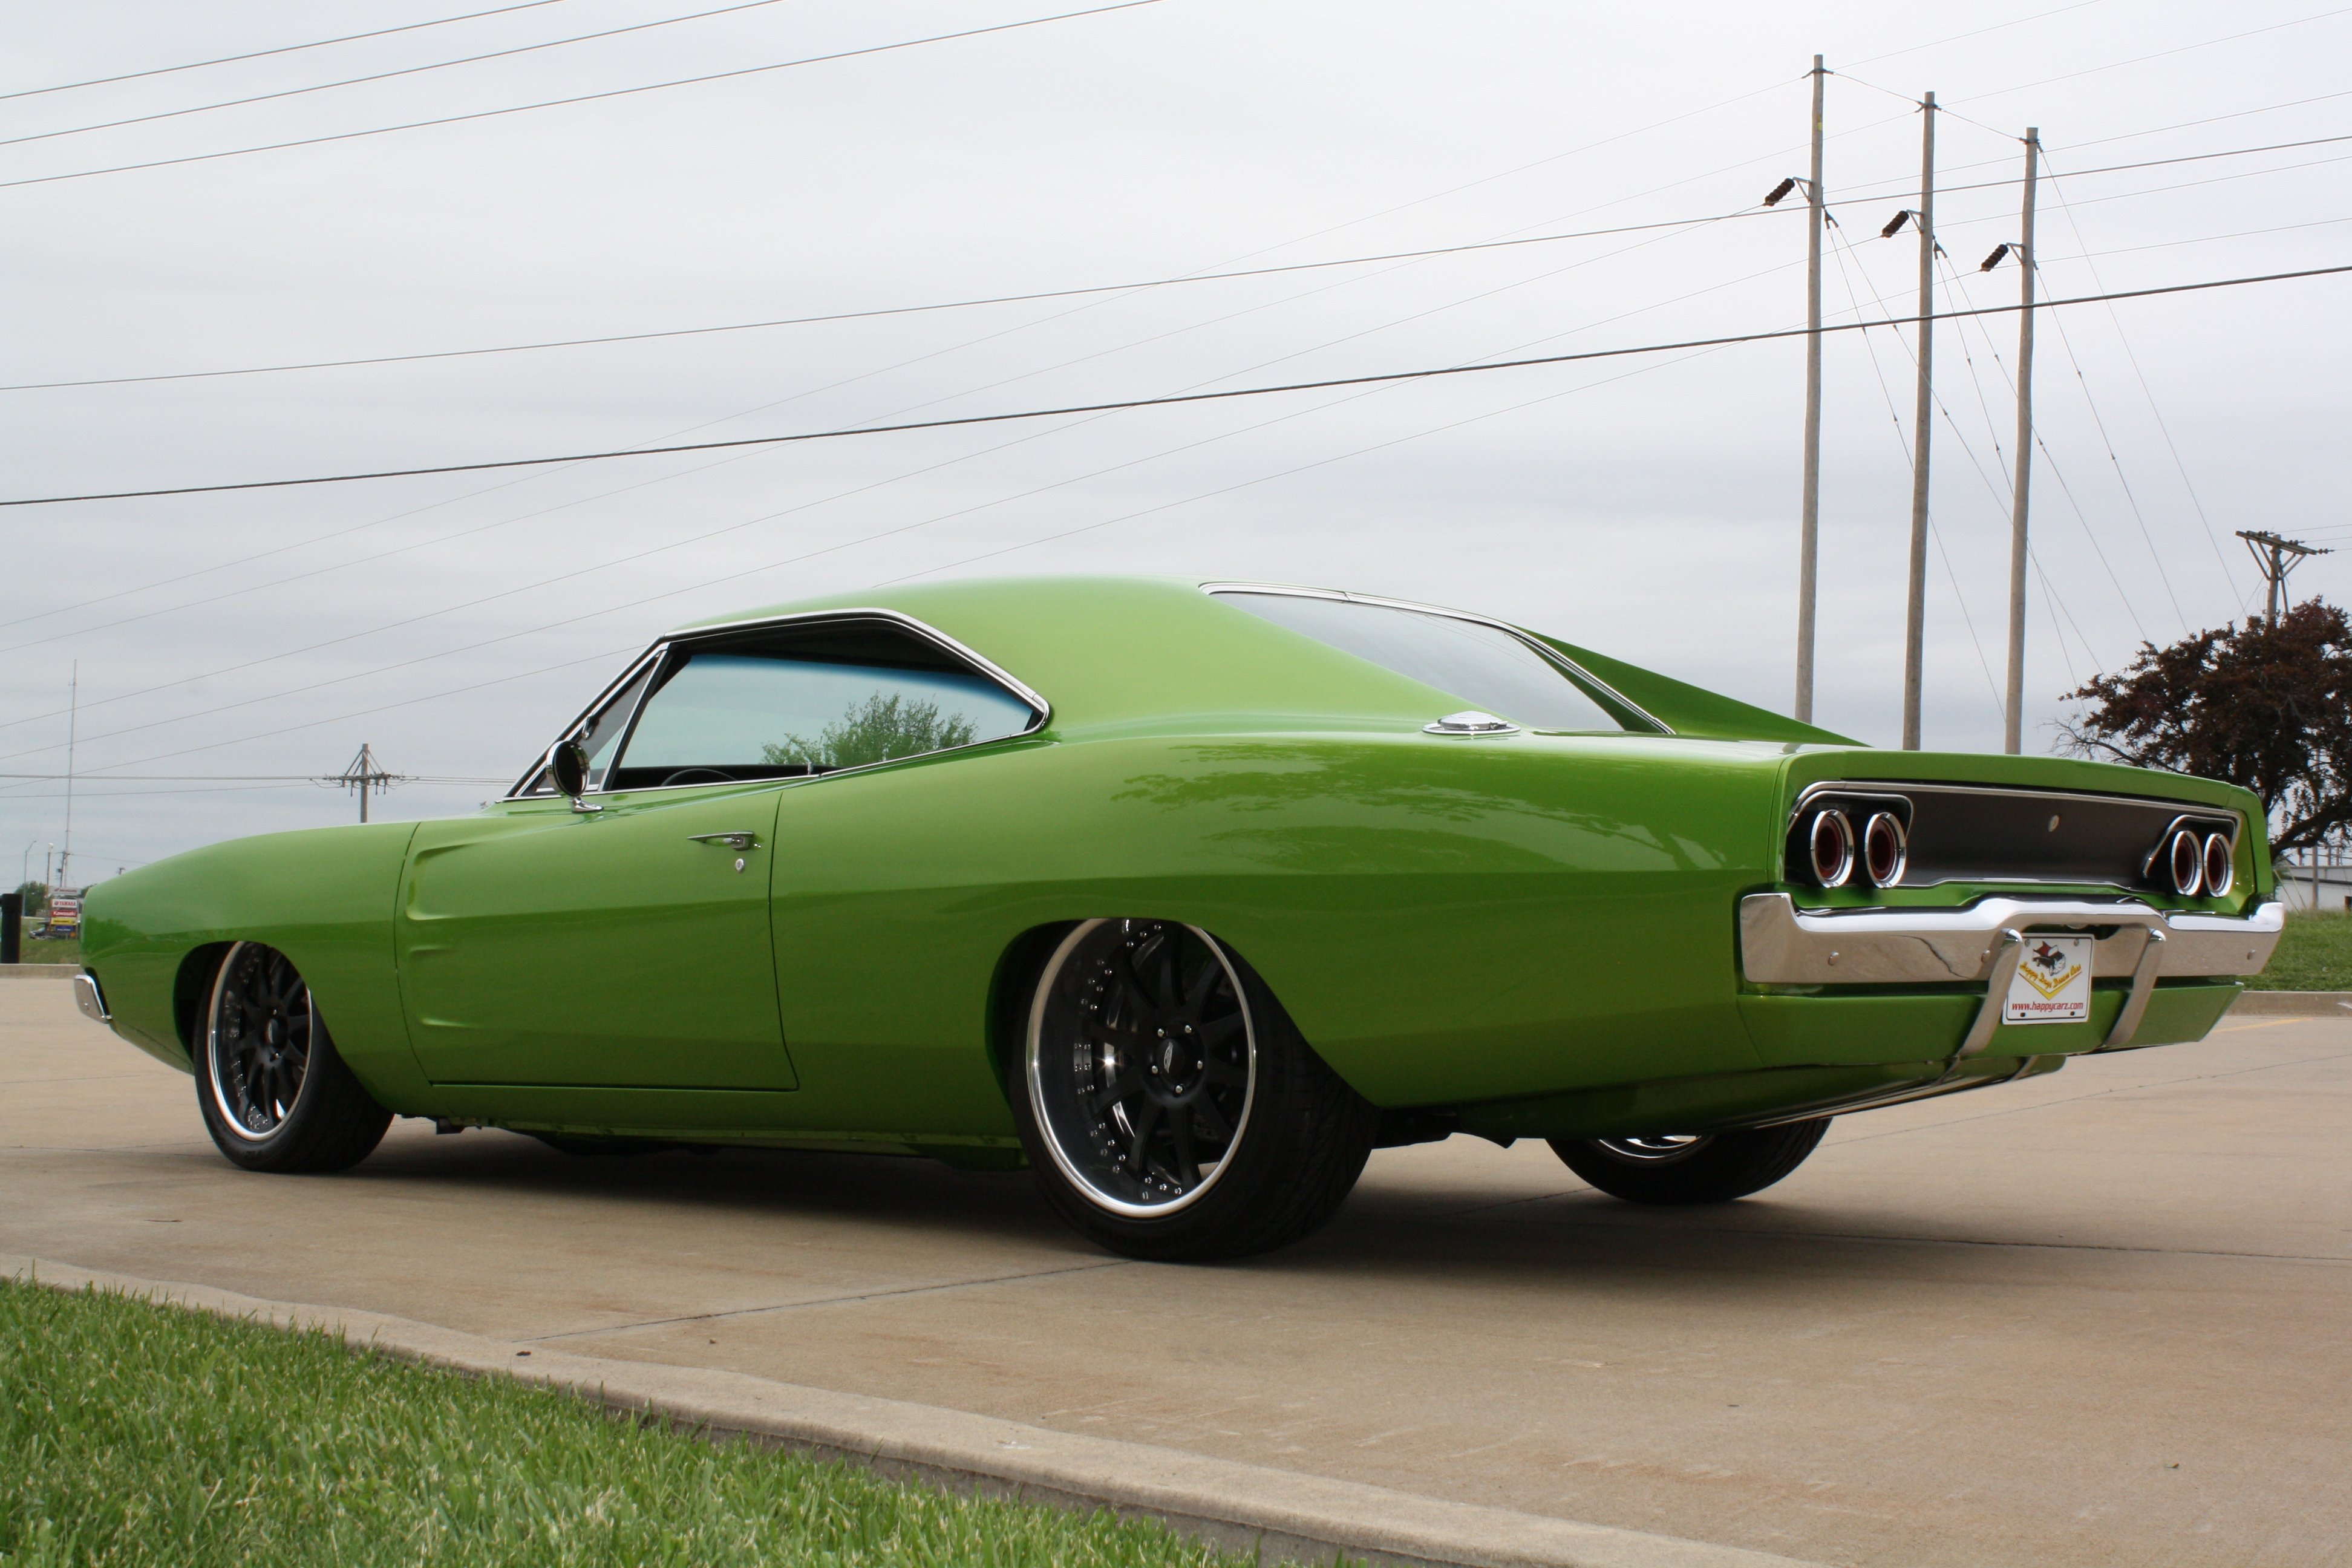 1968, Dodge, Charger, Rt, Streetrod, Street, Rod, Hot, Low, Muscle, Usa, 2888x2592 02 Wallpaper